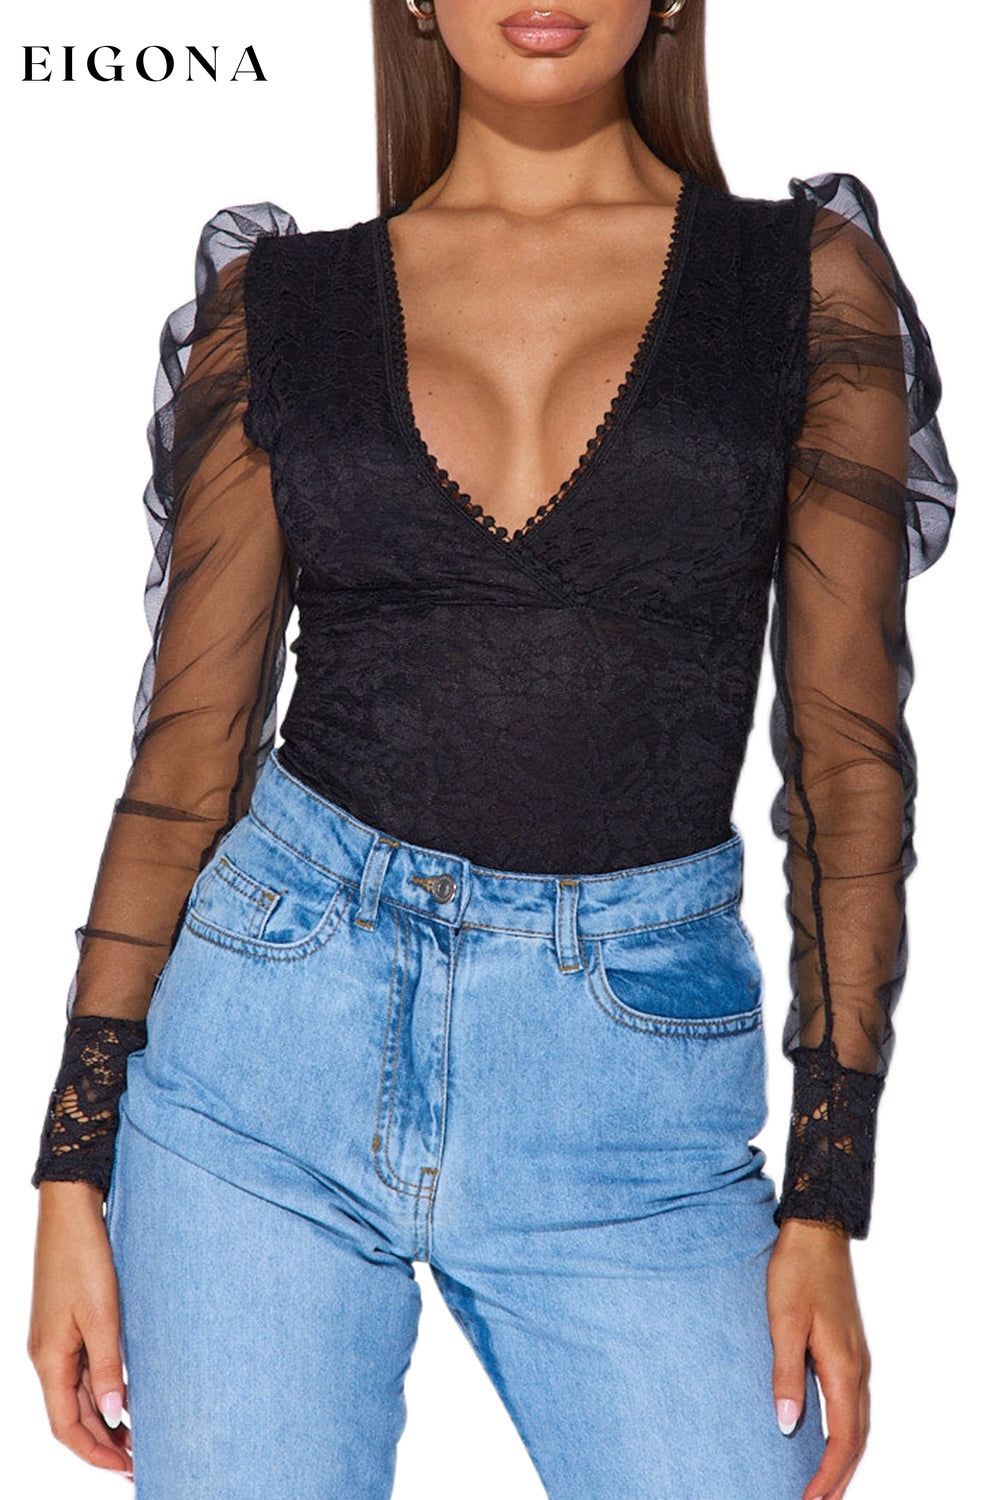 Black V Neck Lace Sheer Puff Sleeve Bodysuit blouse clothes DL Chic DL Exclusive puff sleeve shirt Season Spring top v neck shirt